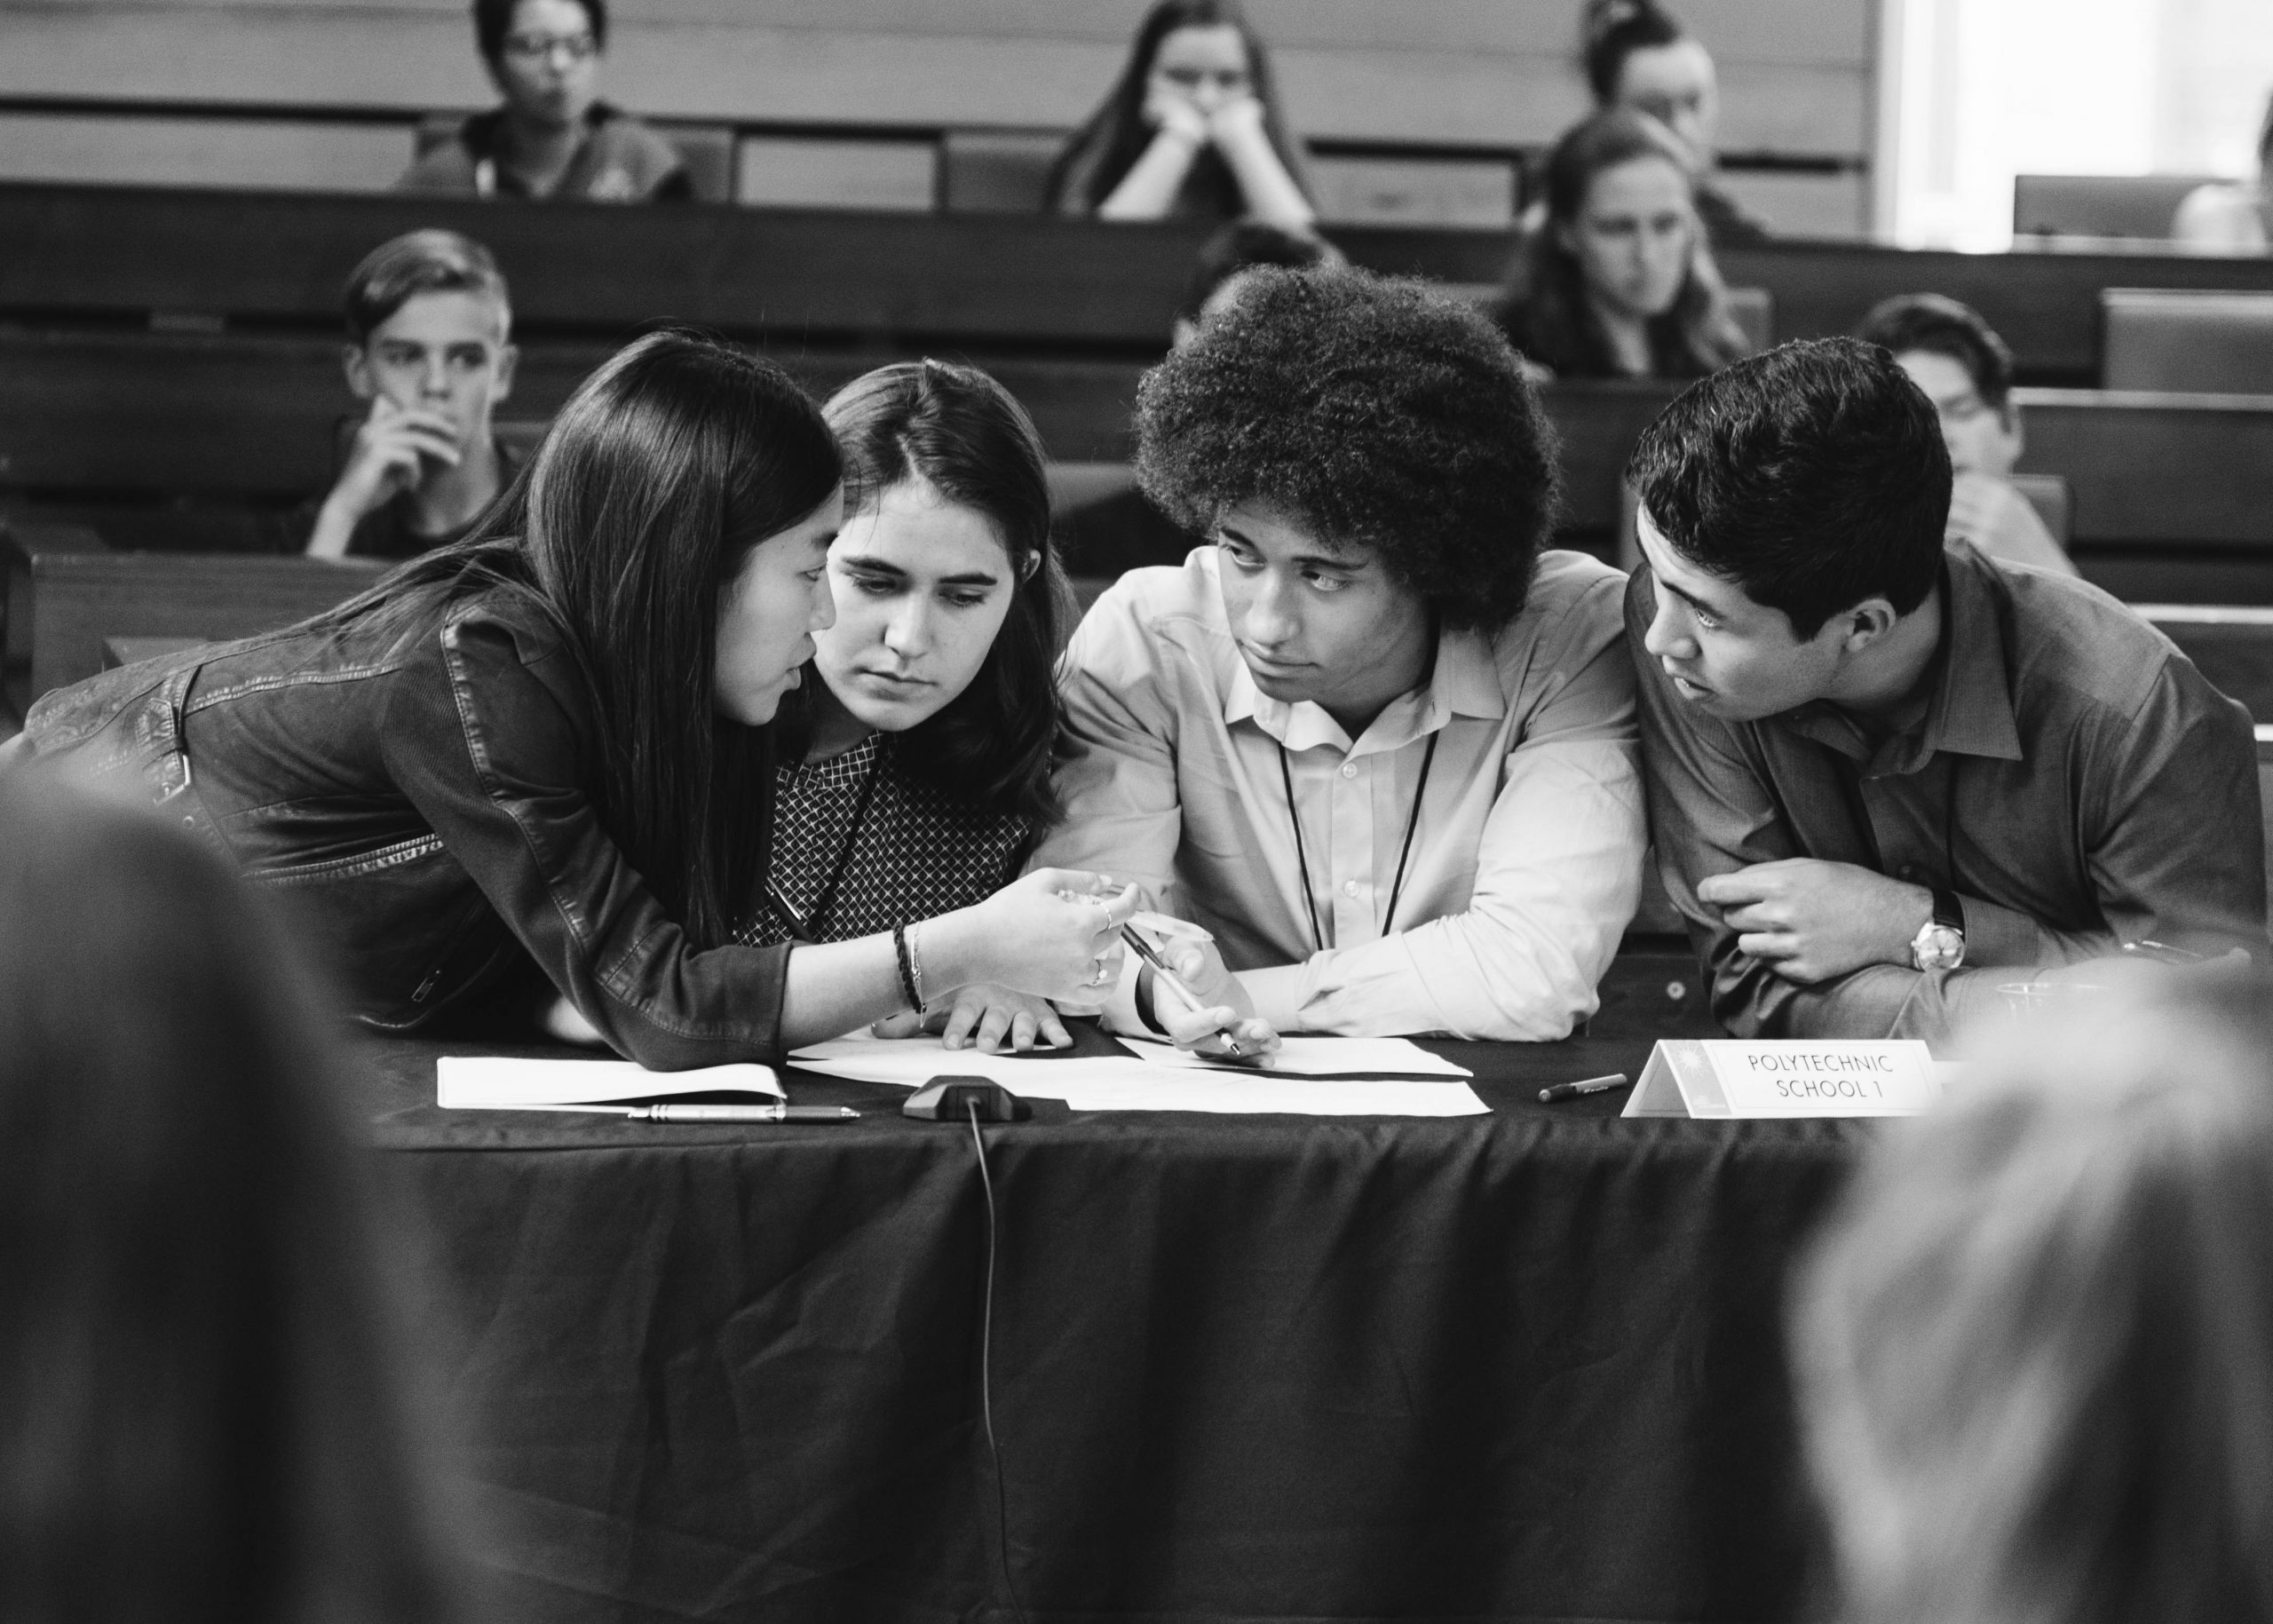 Four high school students sit behind a table, and engage in a serious discussion